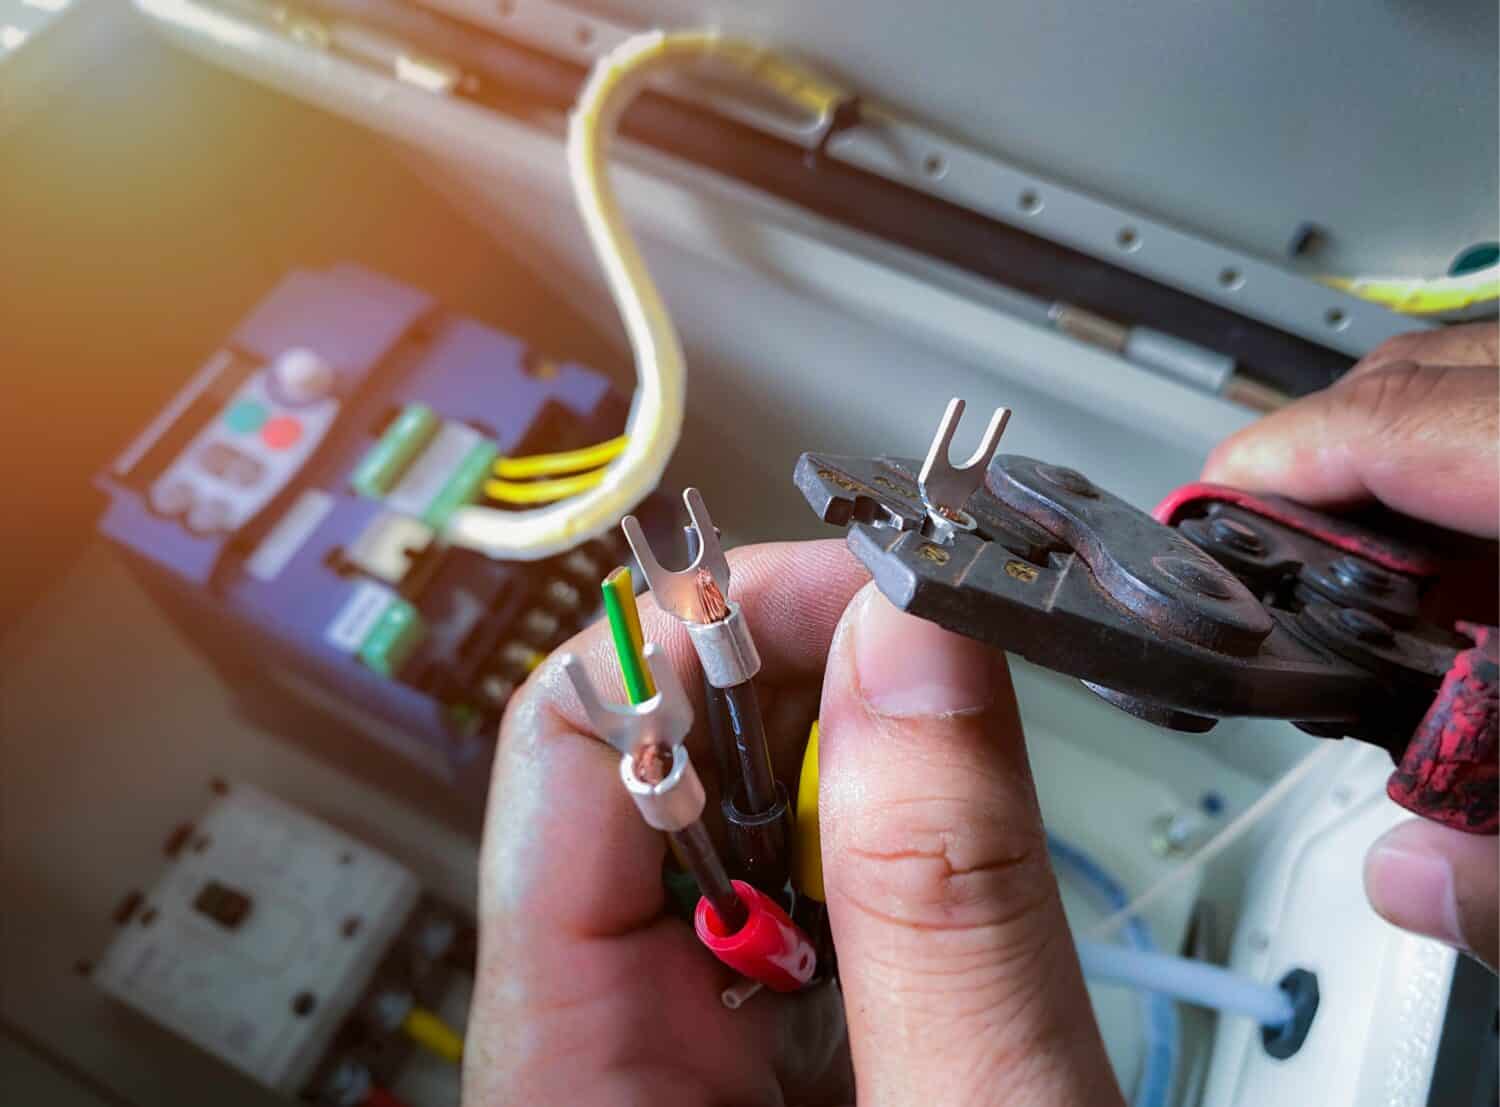 Close up, electrician using pliers to crimp terminals on wires. Wiring work, control cabinet, inverter system used to control electric motors.